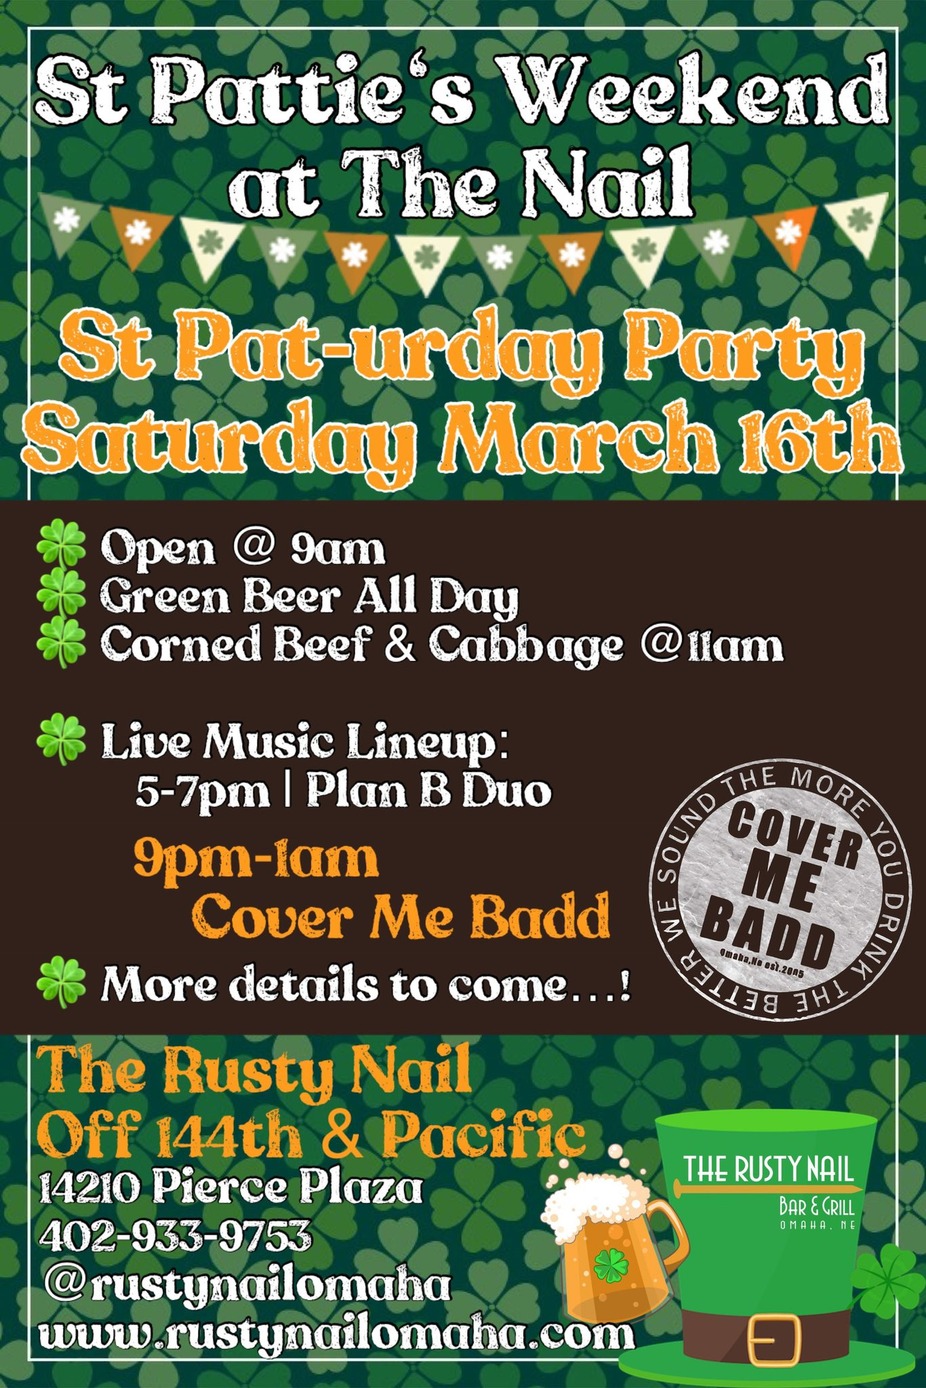 St Pat-urday Party @ The Nail w/ Cover Me Badd Live @9! event photo